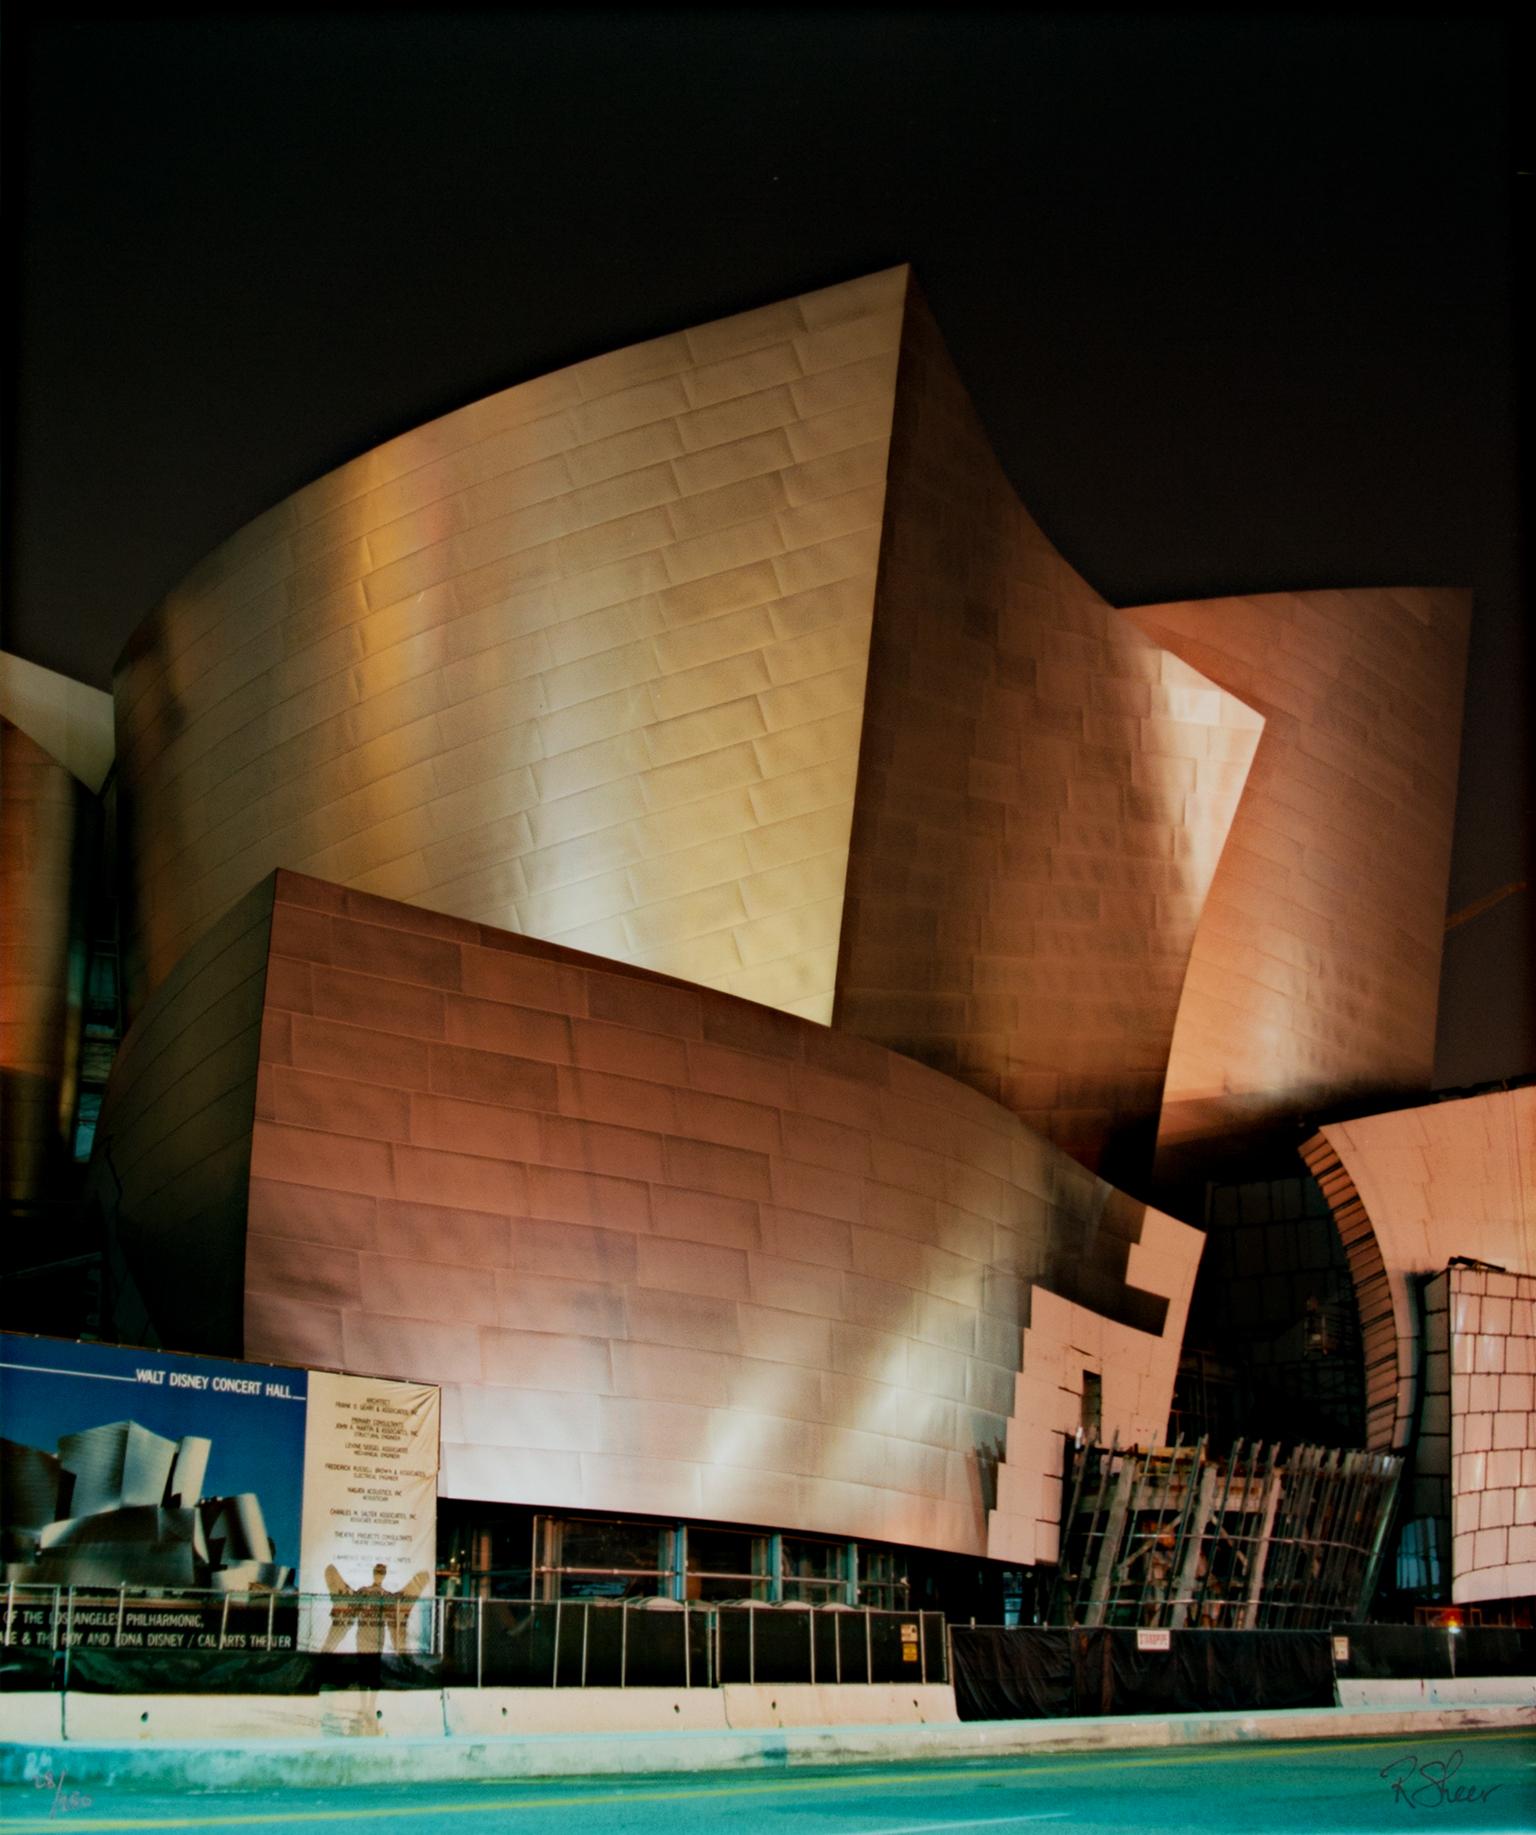 "The Herald Angel Prepares to Sing, Walt Disney Concert Hall - Los Angeles, CA," is an original fine-art performance photograph by Robert Kawika Sheer. The artist signed this piece in the lower right and editioned it in the lower left. Edition: